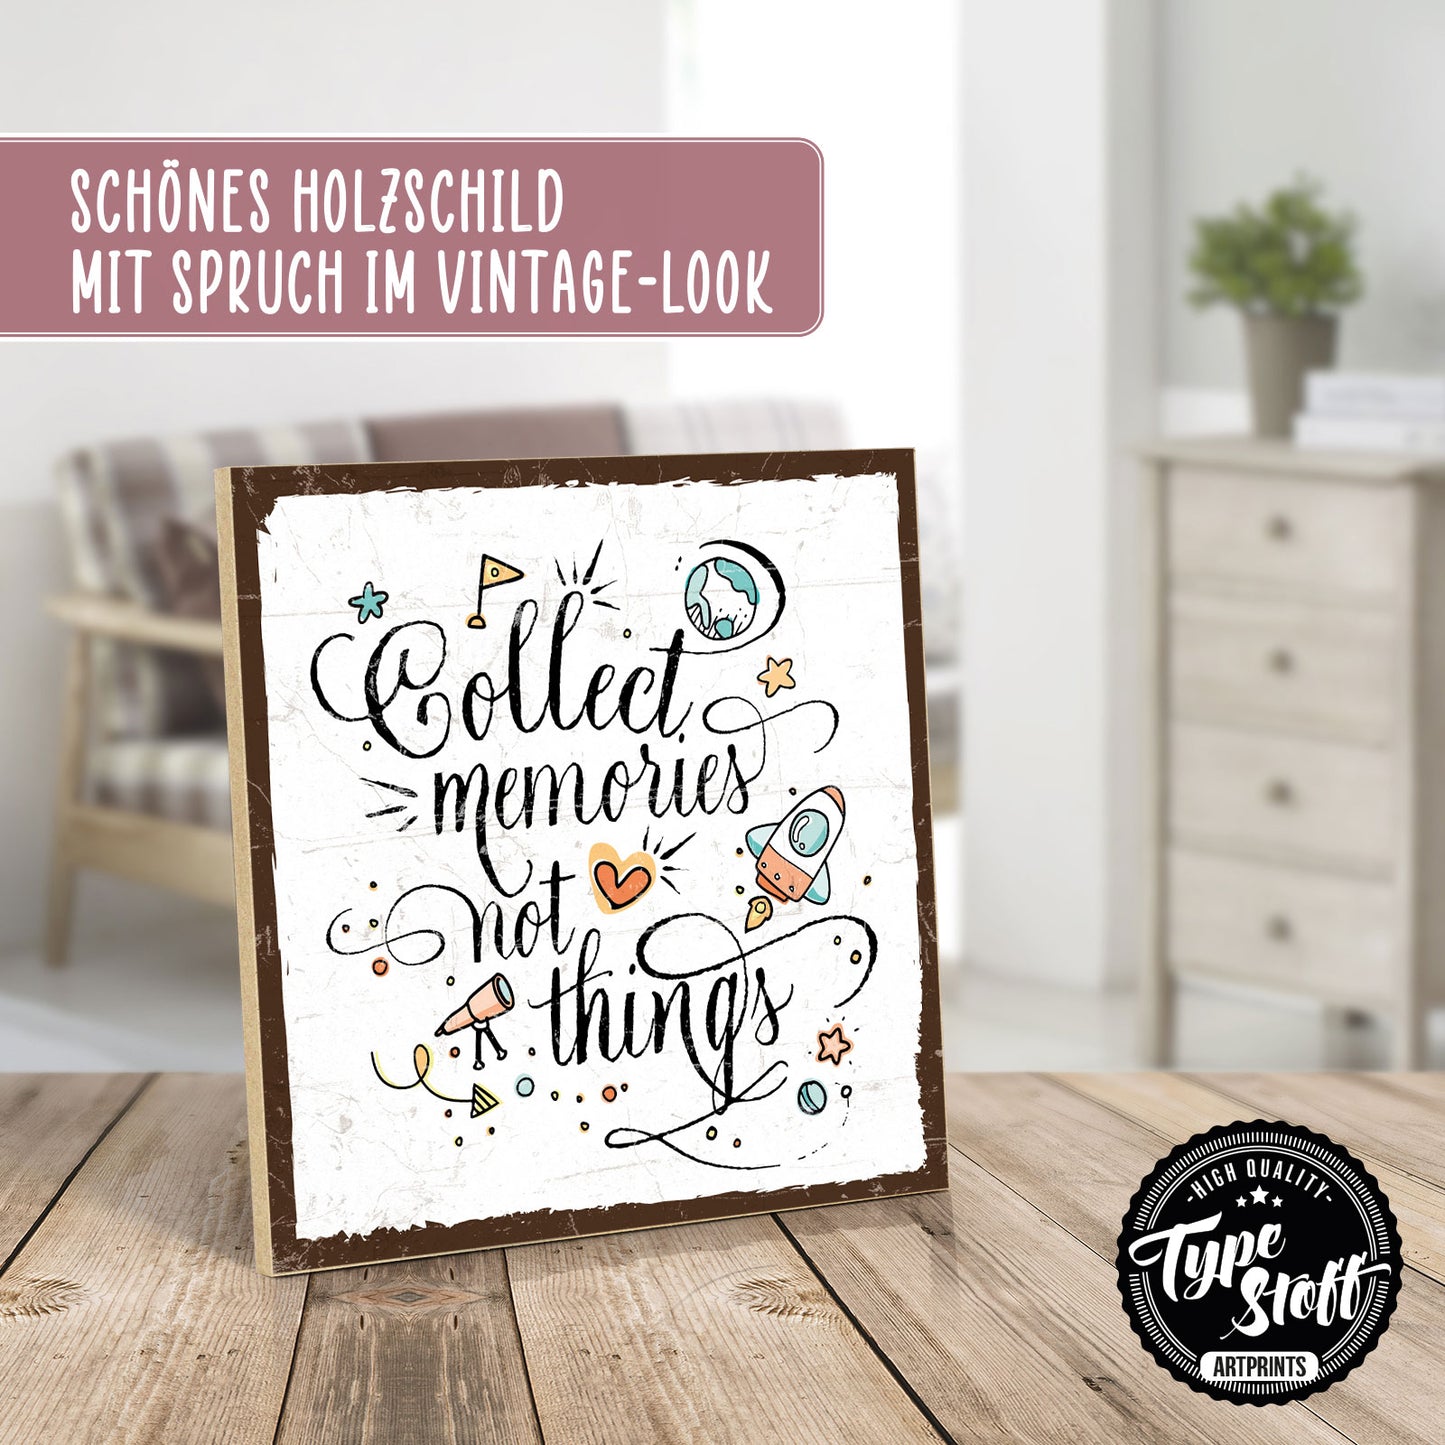 Holzschild mit Spruch - Hygge - collect memories not things – HS-QN-01273